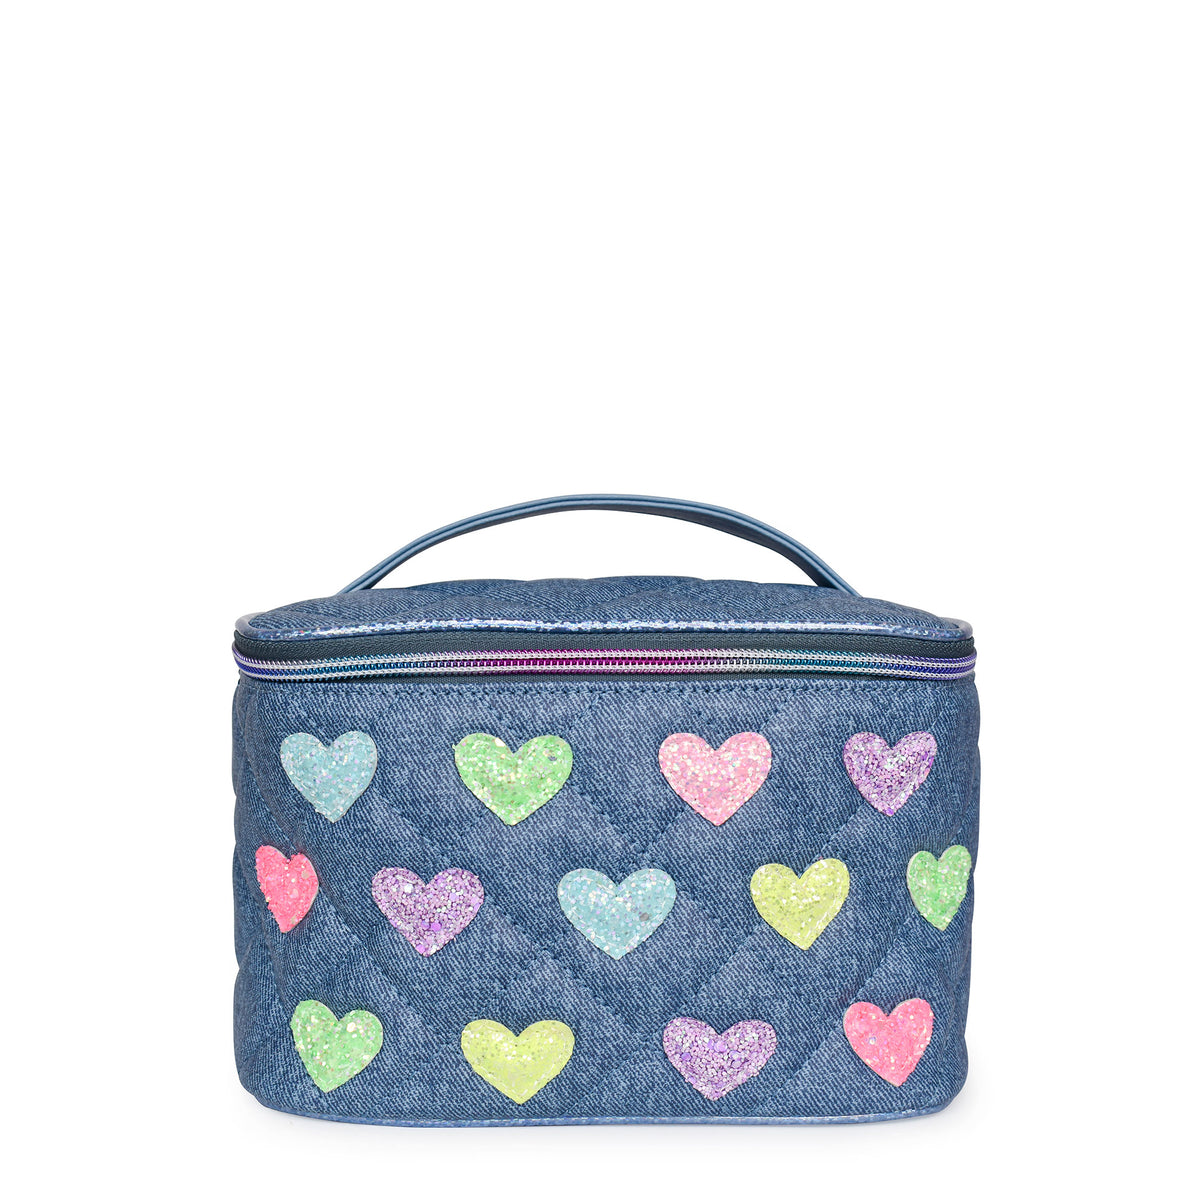 OMG Accessories - Heart Patched Denim Quilted Glam Bag